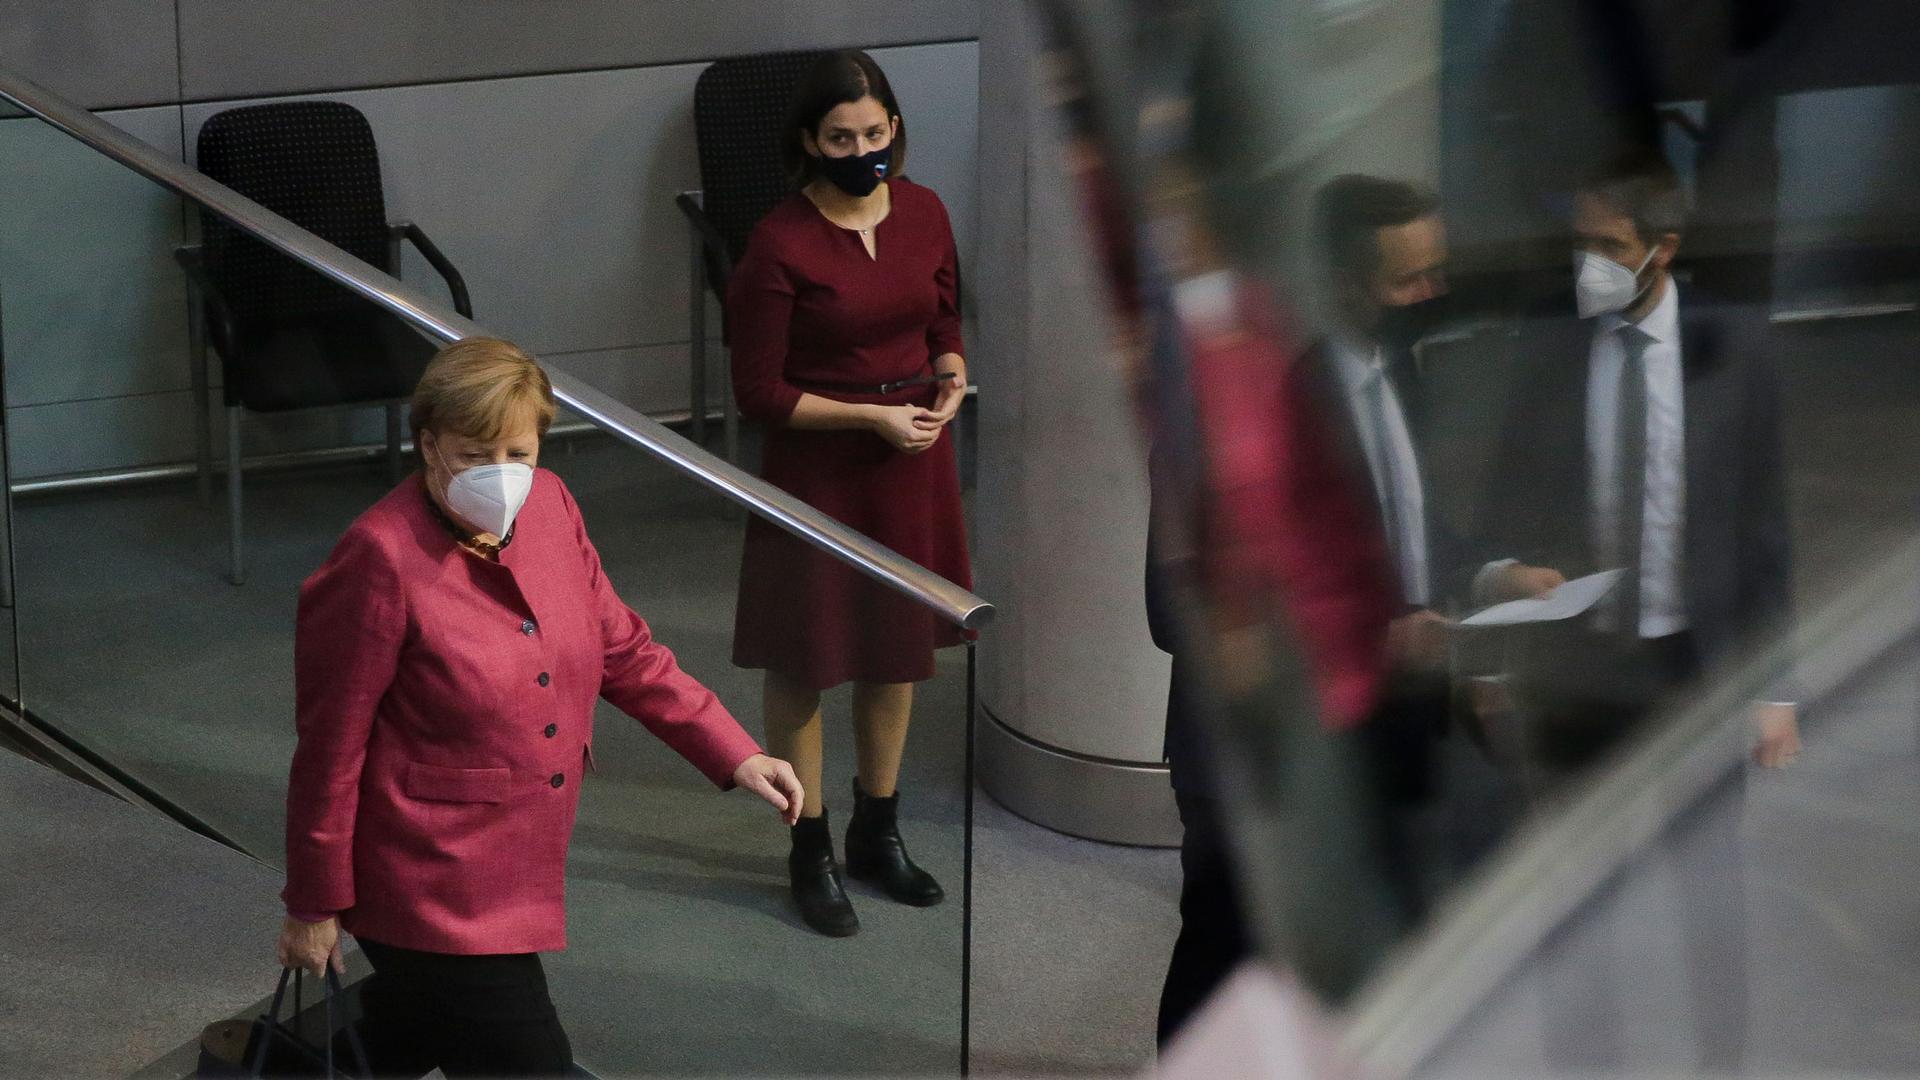 German Chancellor Angela Merkel is shown walking with a briefcase and wearing a red jacket with a woman behind her wearing a dark red dress.